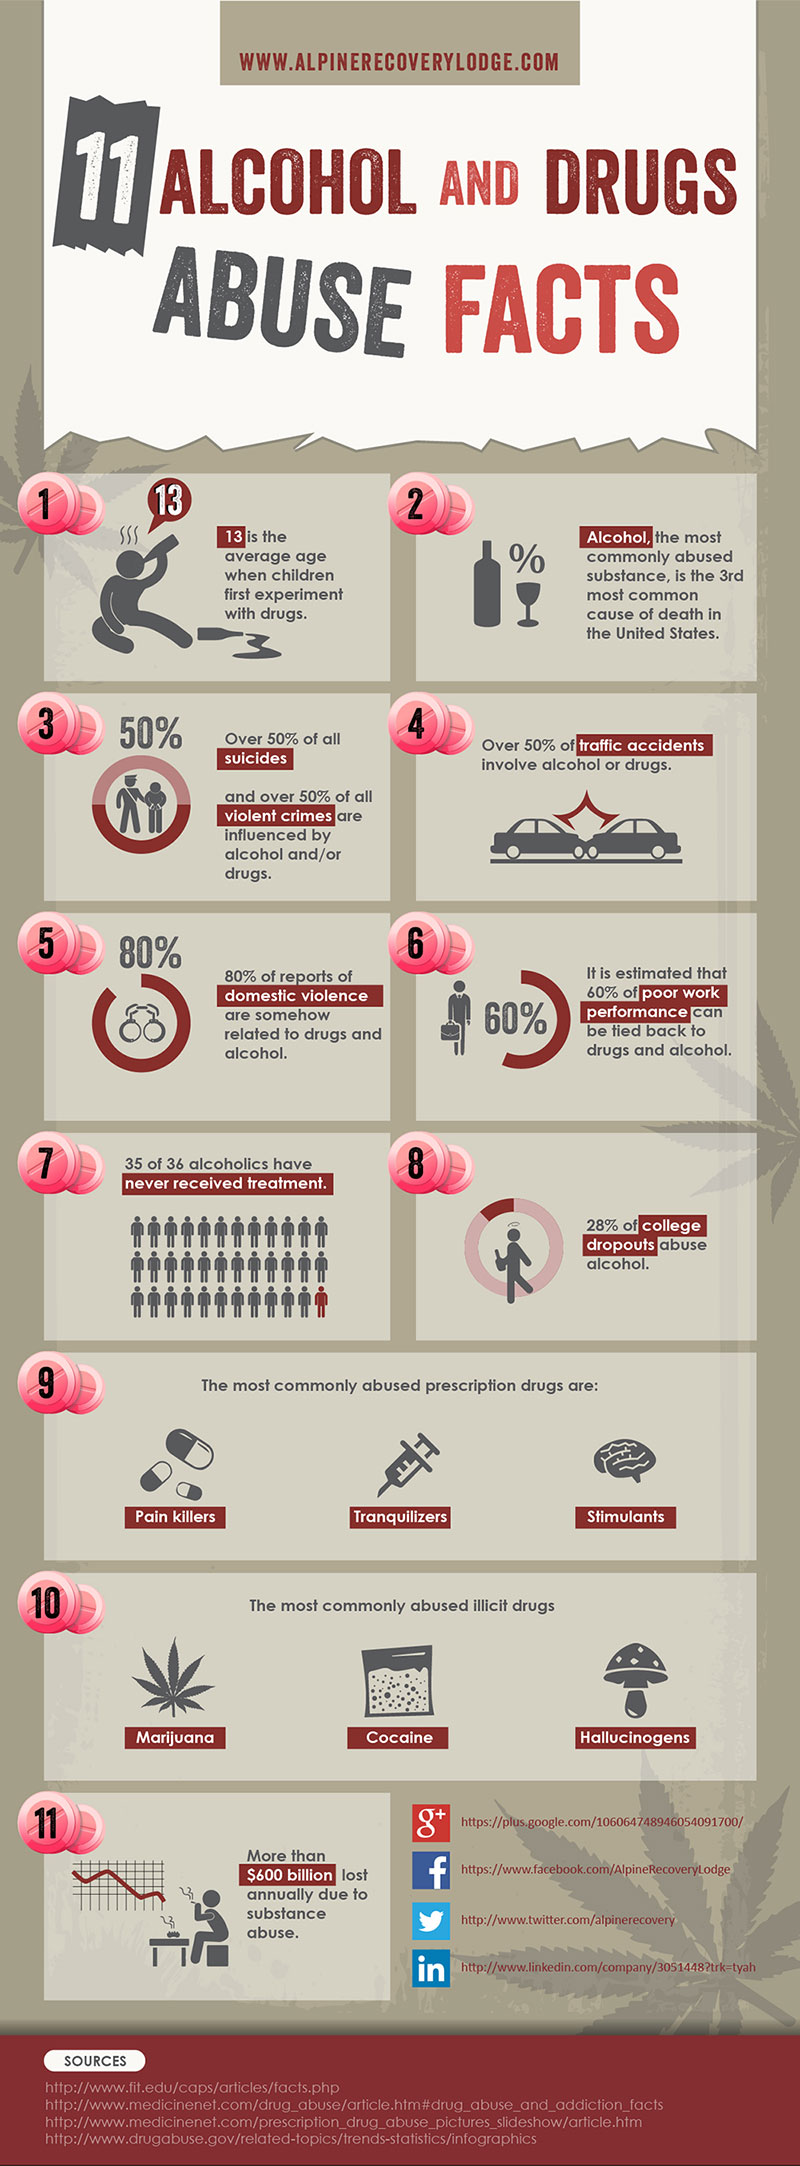 11 Alcohol and Drug Abuse Facts infographic